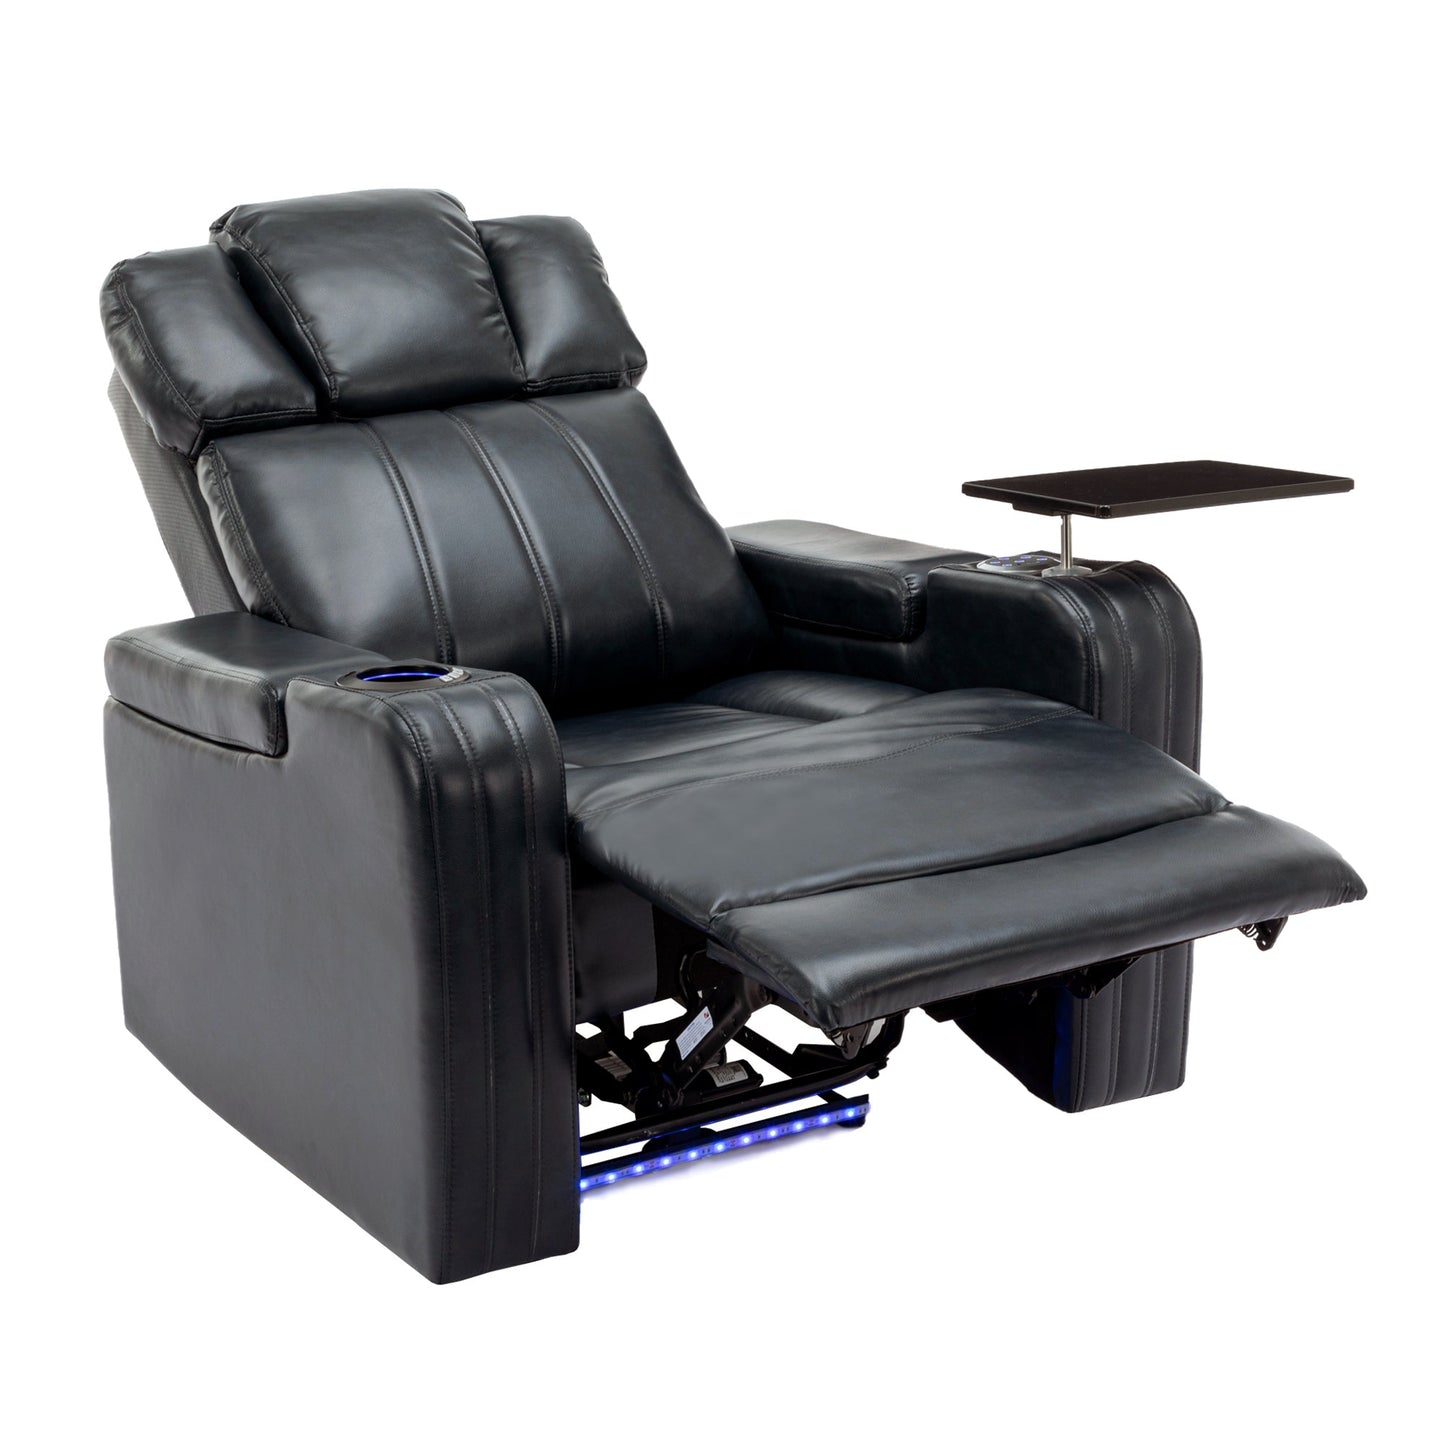 PU Leather Power Recliner Individual Seat Home Theater Recliner with Cooling Cup Holder, Bluetooth Speaker, LED Lights, USB Ports, Tray Table, Arm Storage for Living Room, Black